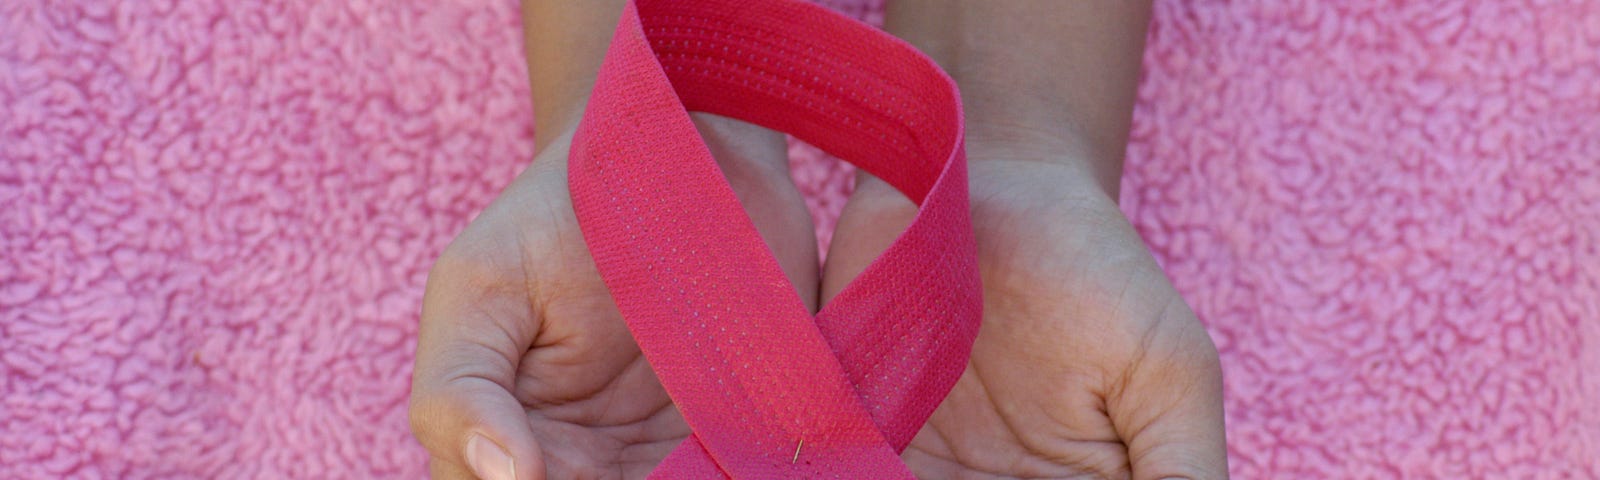 A woman holds a breast cancer ribbon against a fluffy pink blanket